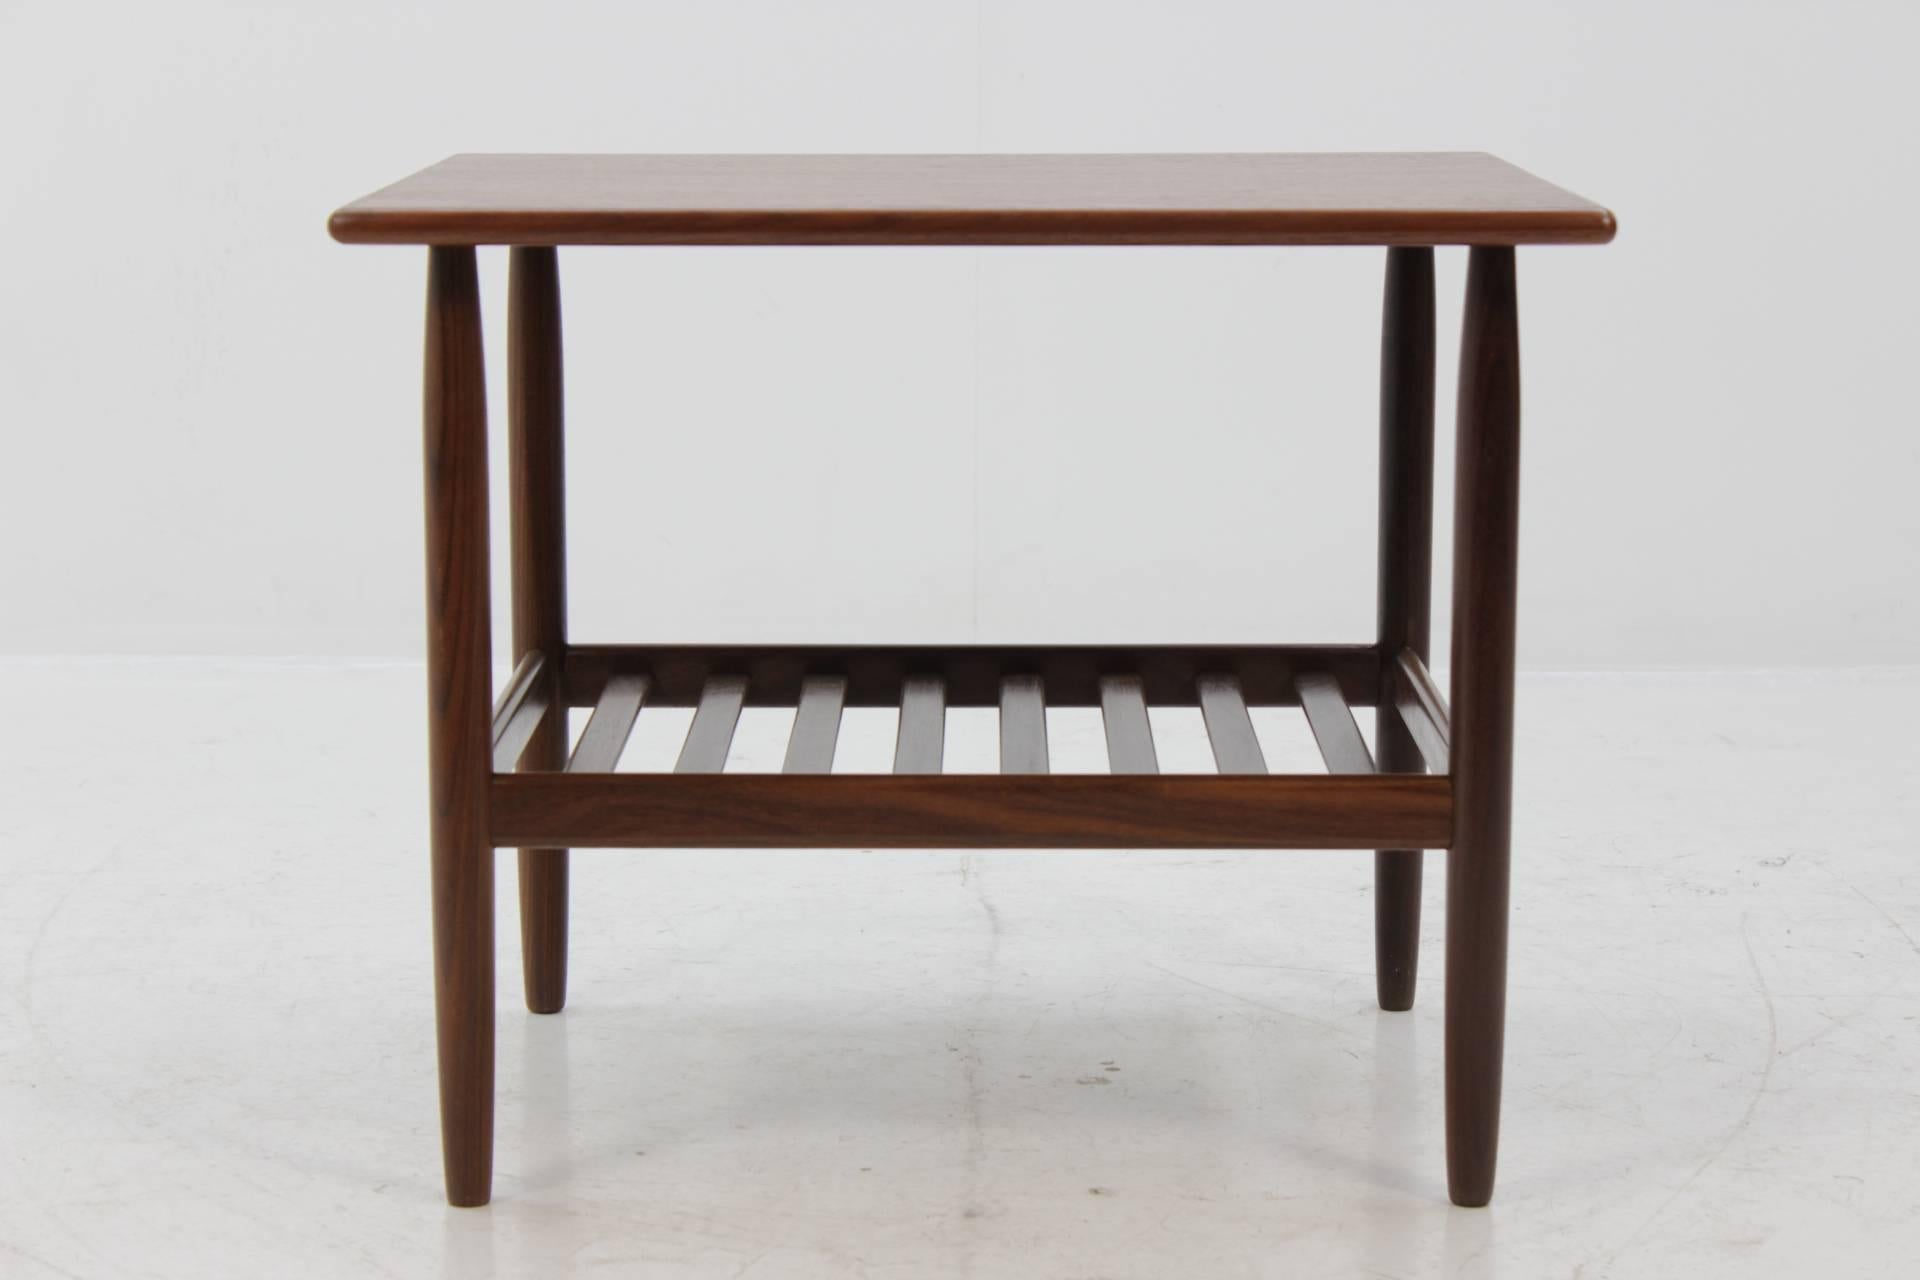 Produced in Denmark and made of solid teak wood and veneer.
Item was carefully refurbished.